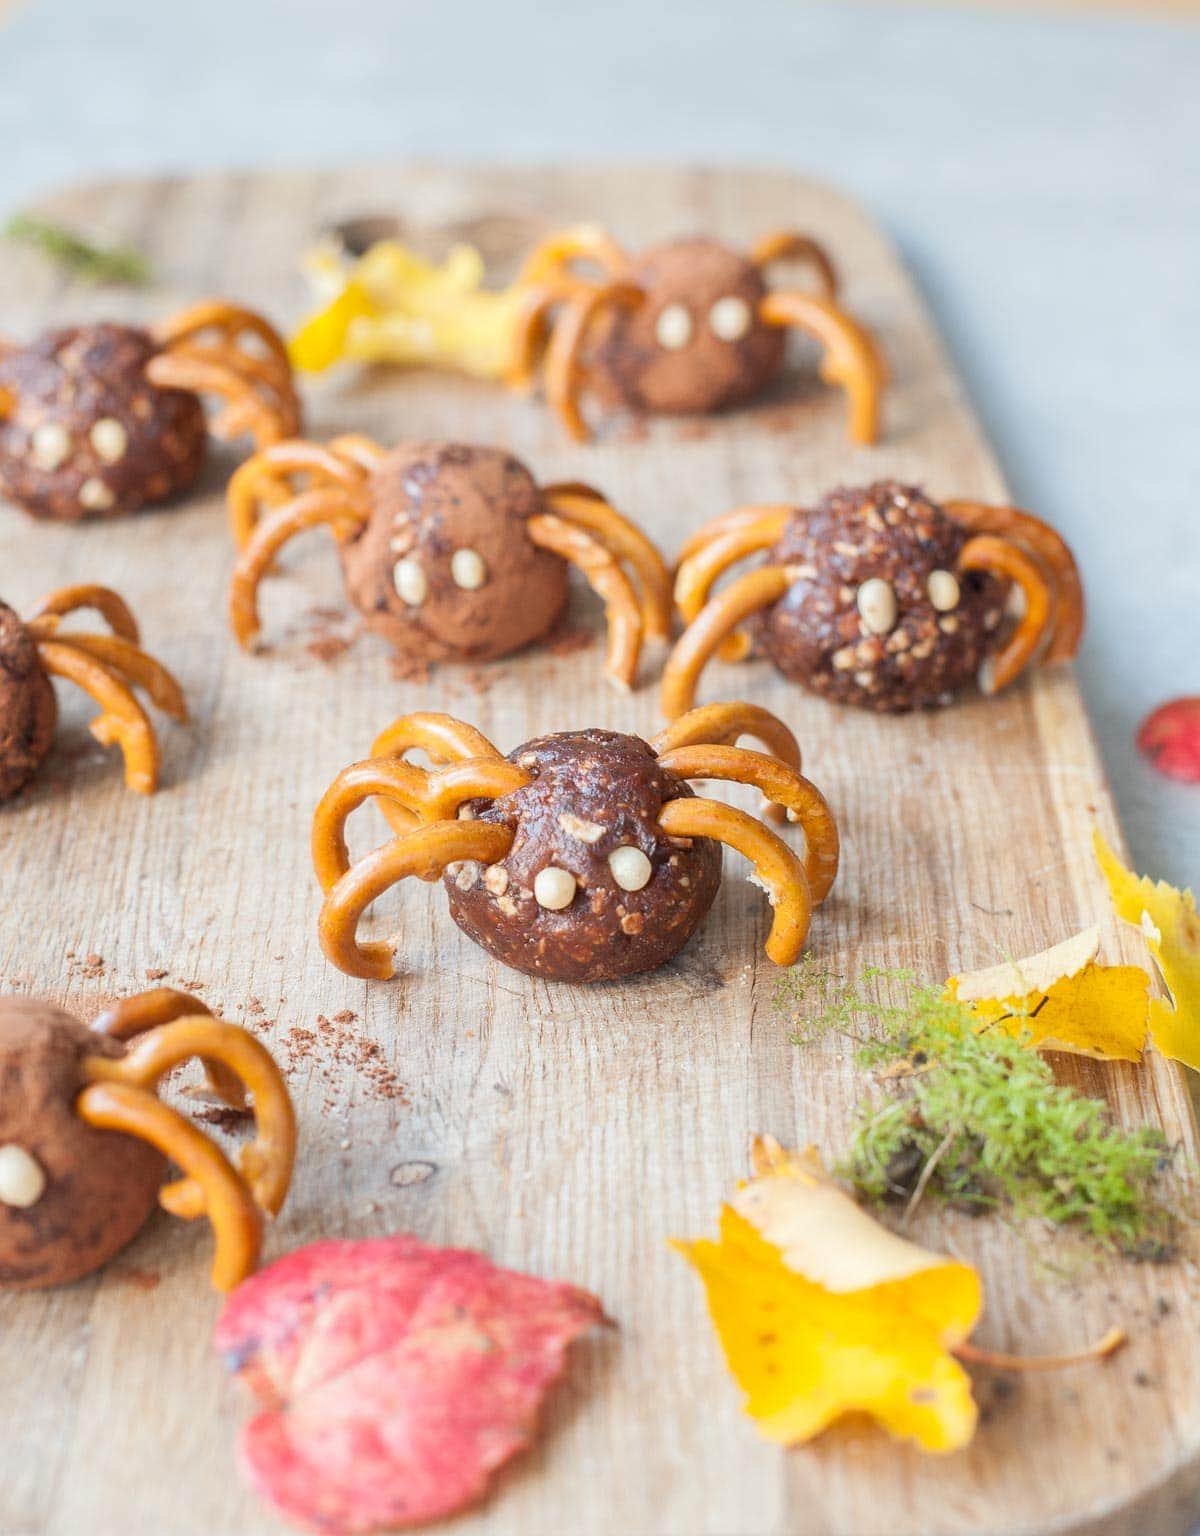 Pretzel spiders on a chopping board. Leaves scattered around.